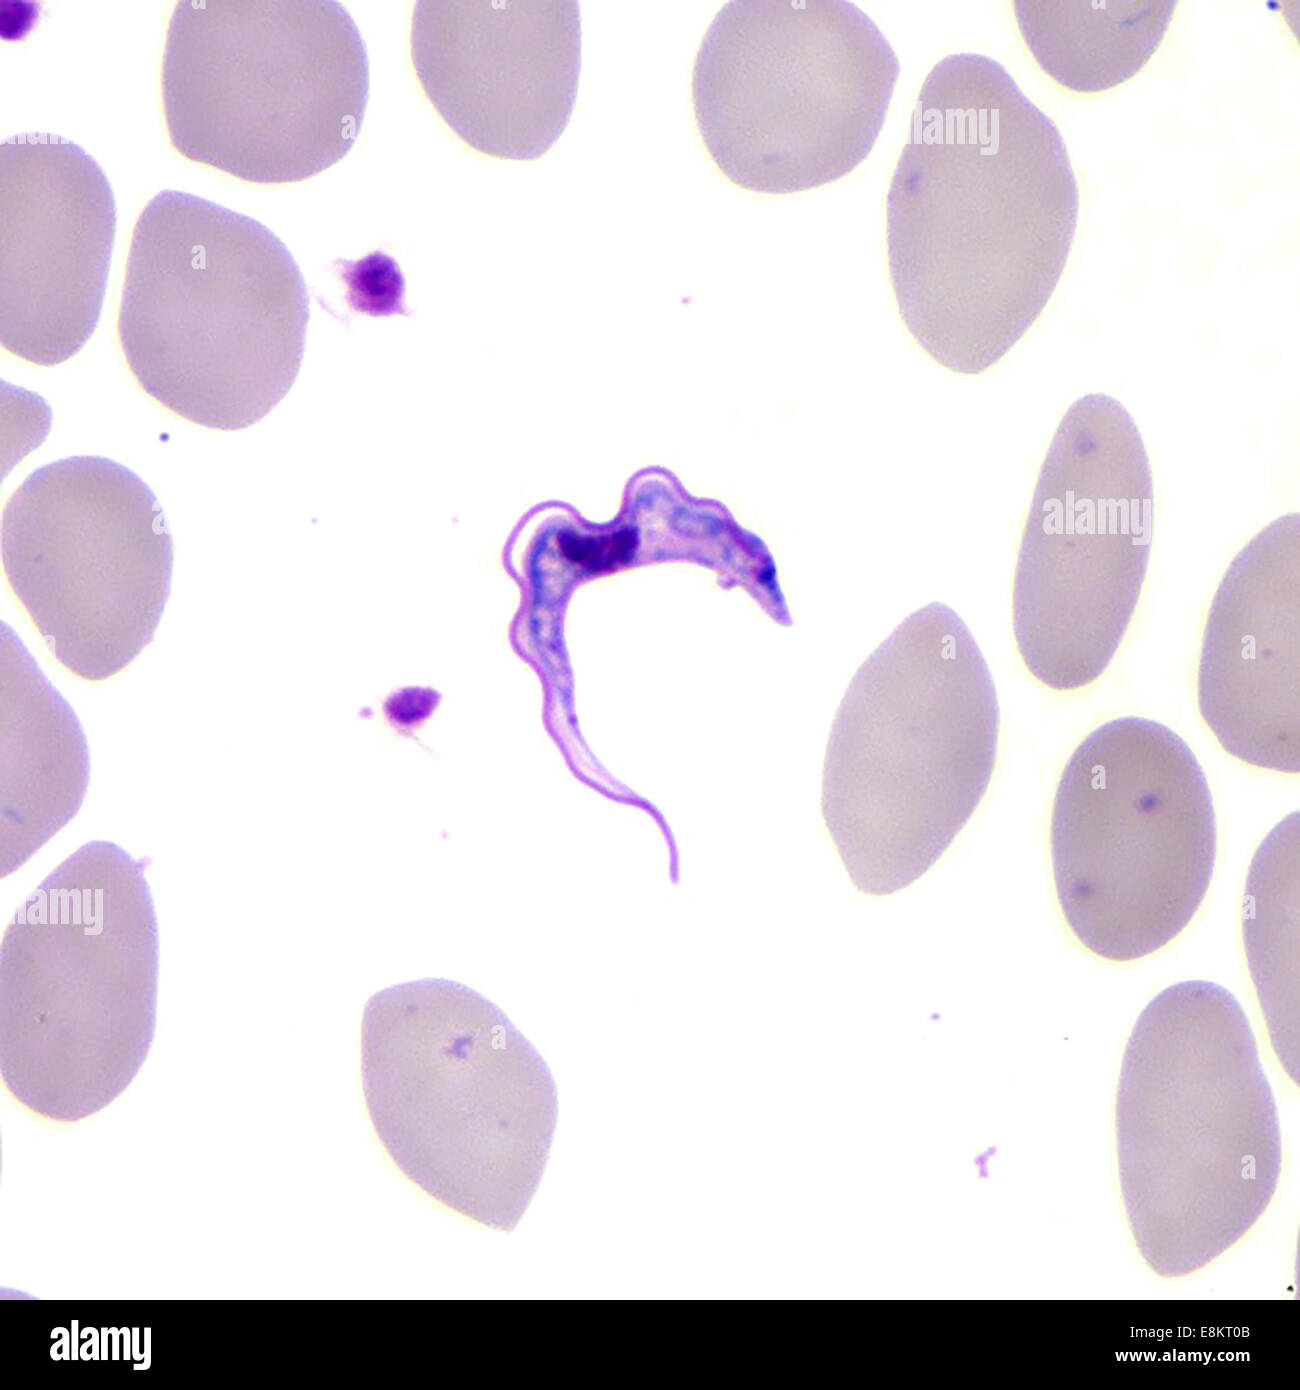 This Giemsa-stained light photomicrograph revealed presence of two Trypanosoma brucei parasites, which were found in blood Stock Photo